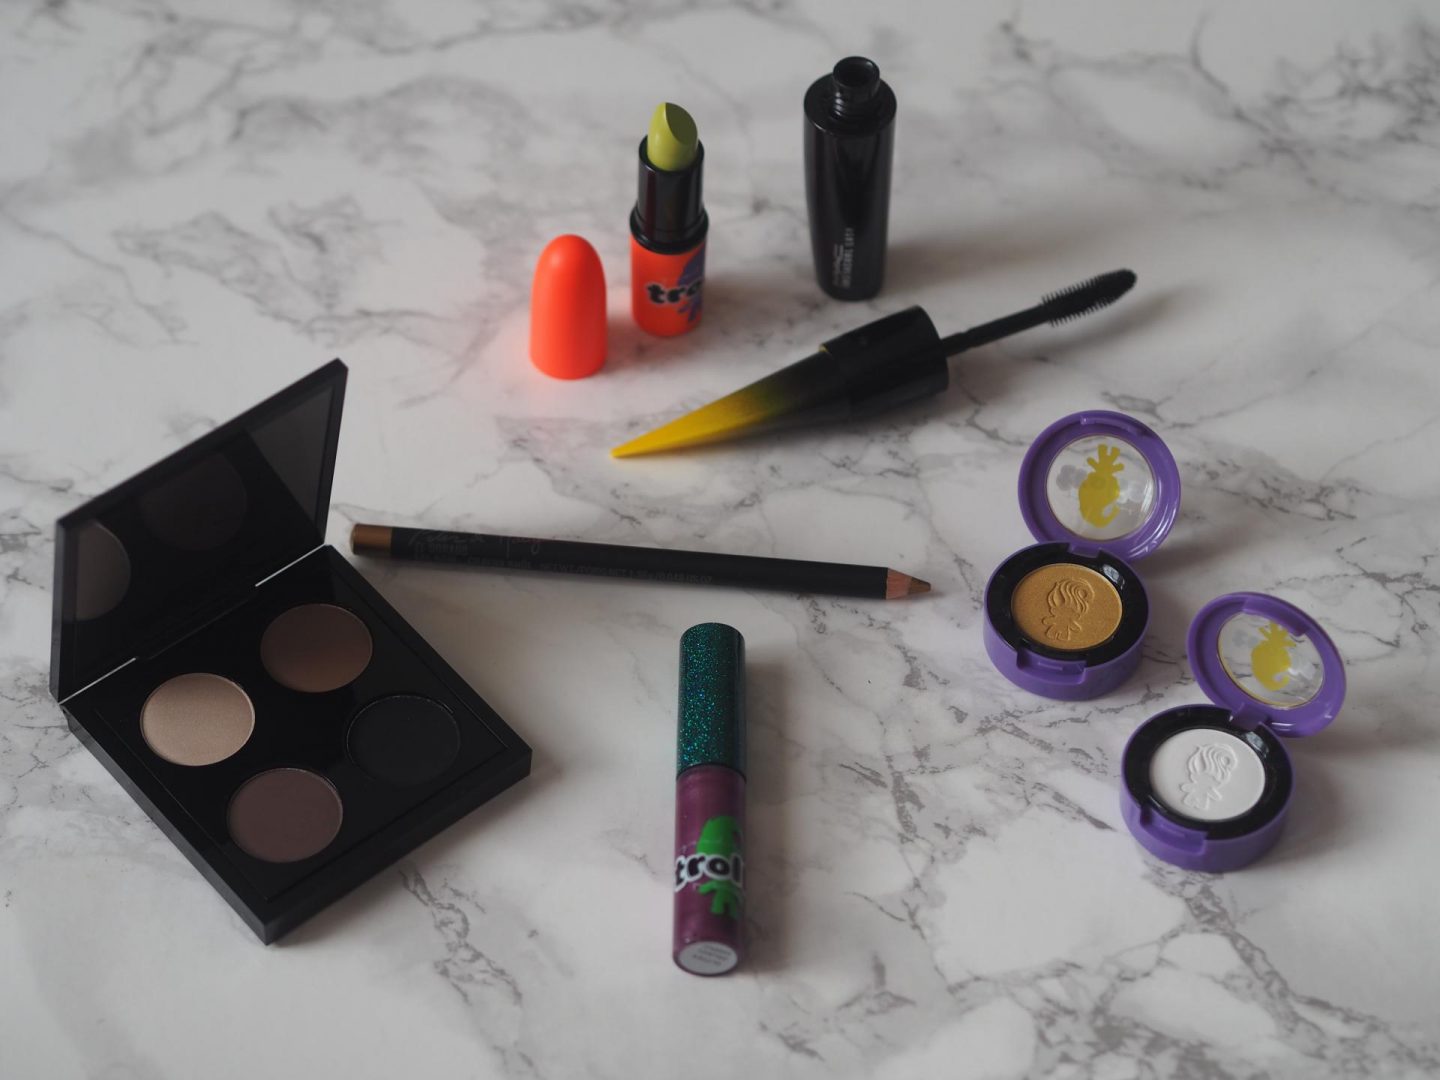 MAC Cosmetics New August Launches – Goodluck Trolls & Brant Brothers